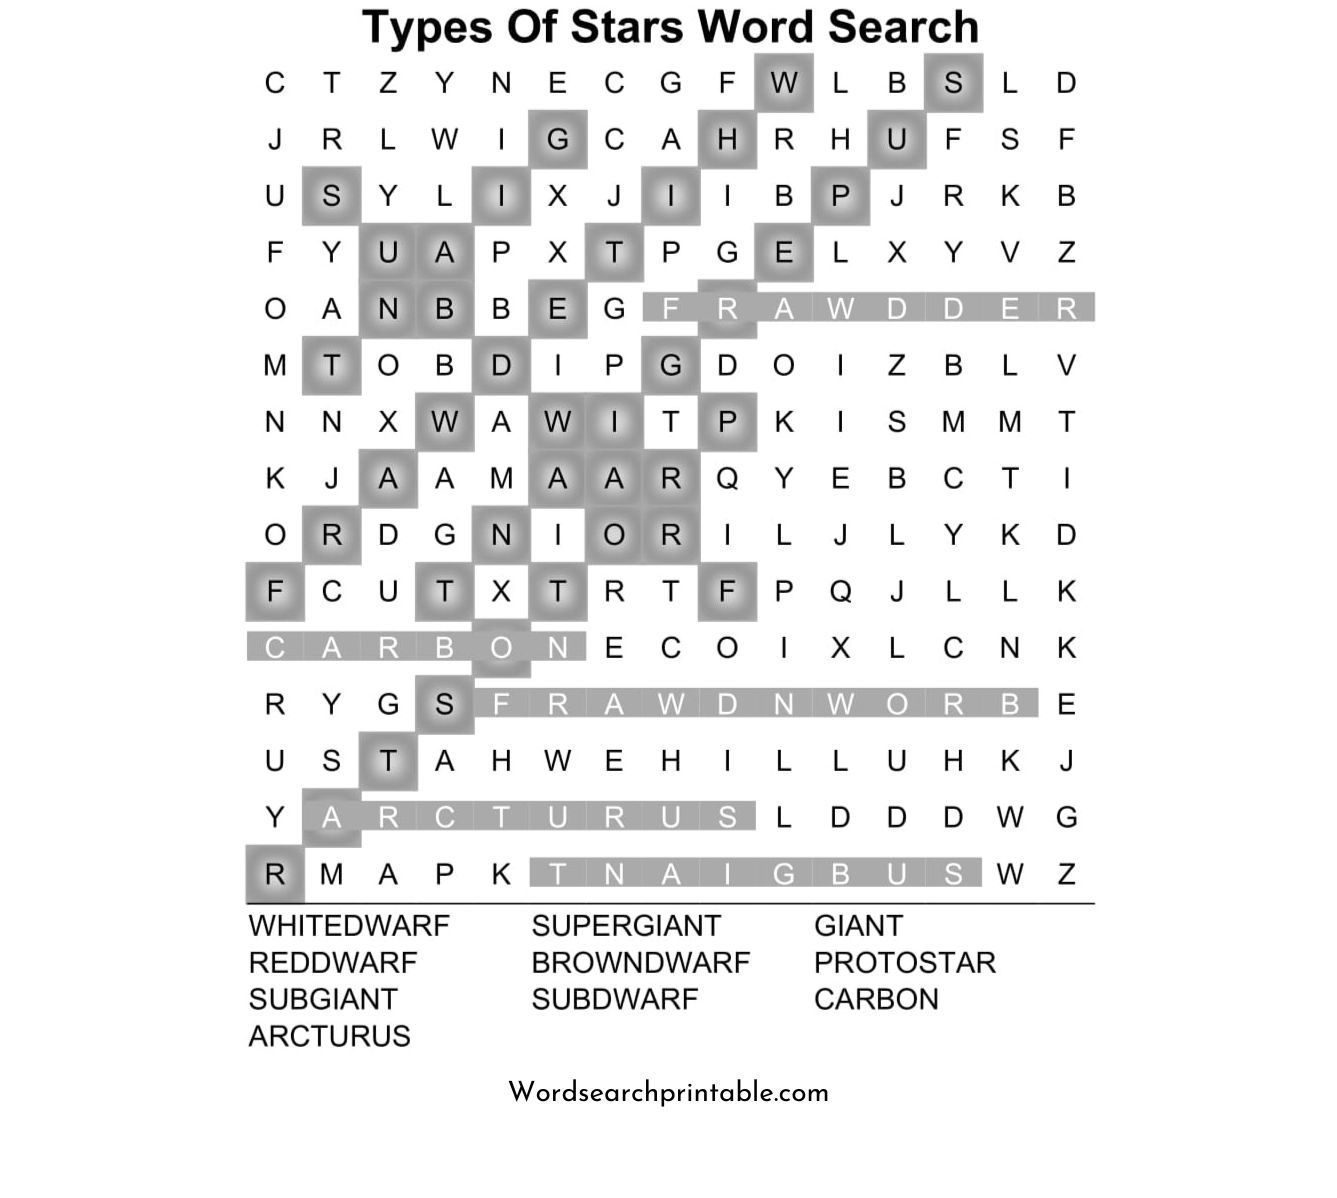 types of stars word search puzzle solution